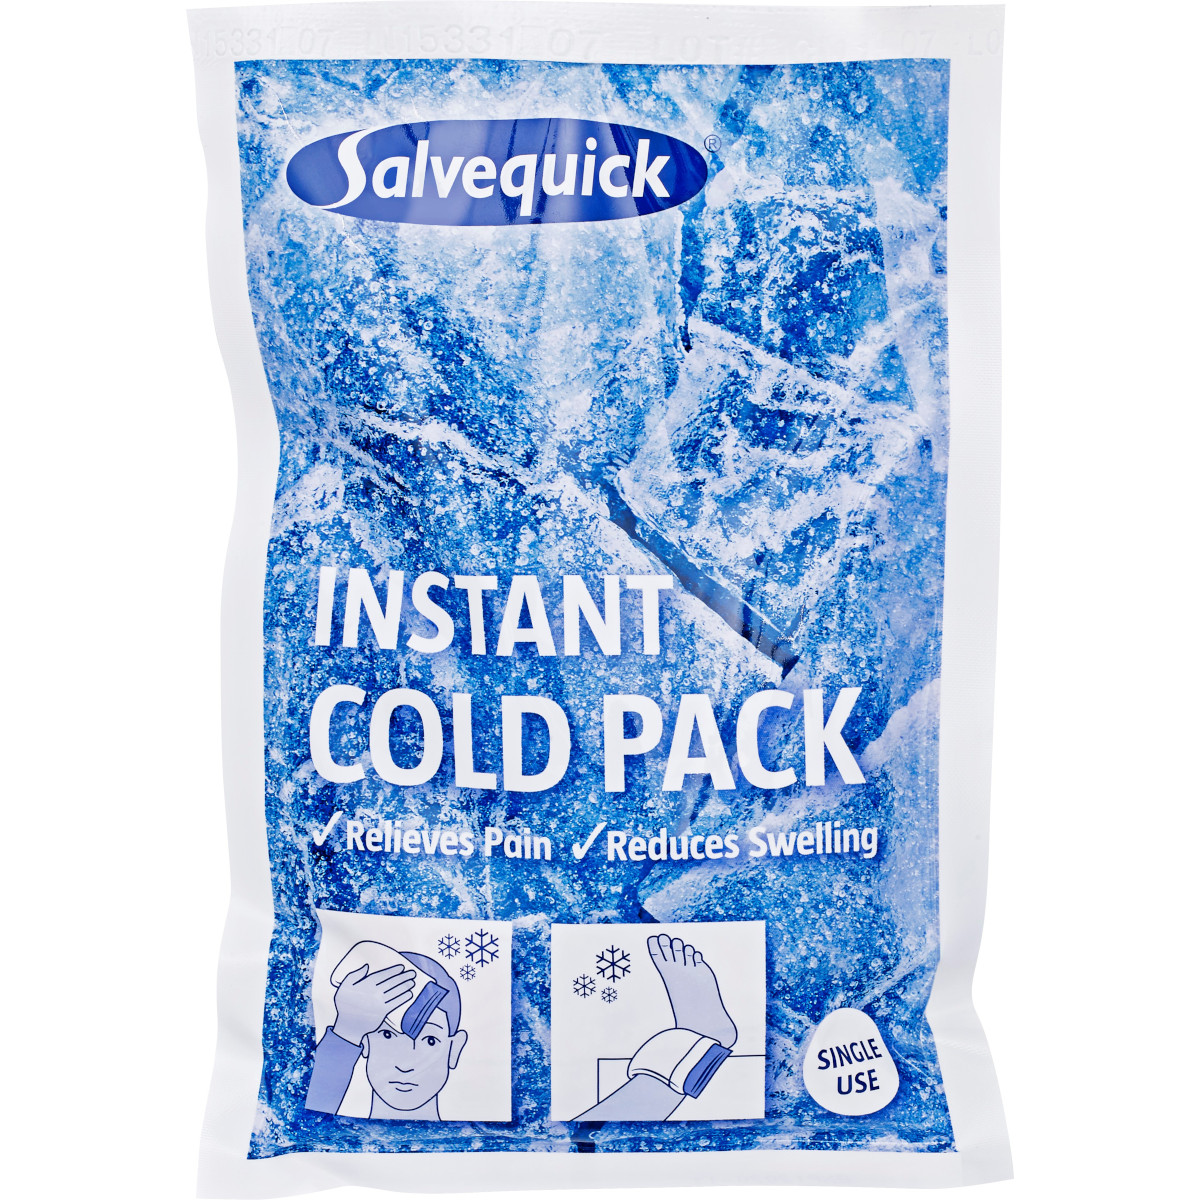 9: Salvequick - Instant Cold Pack - 6 Stk